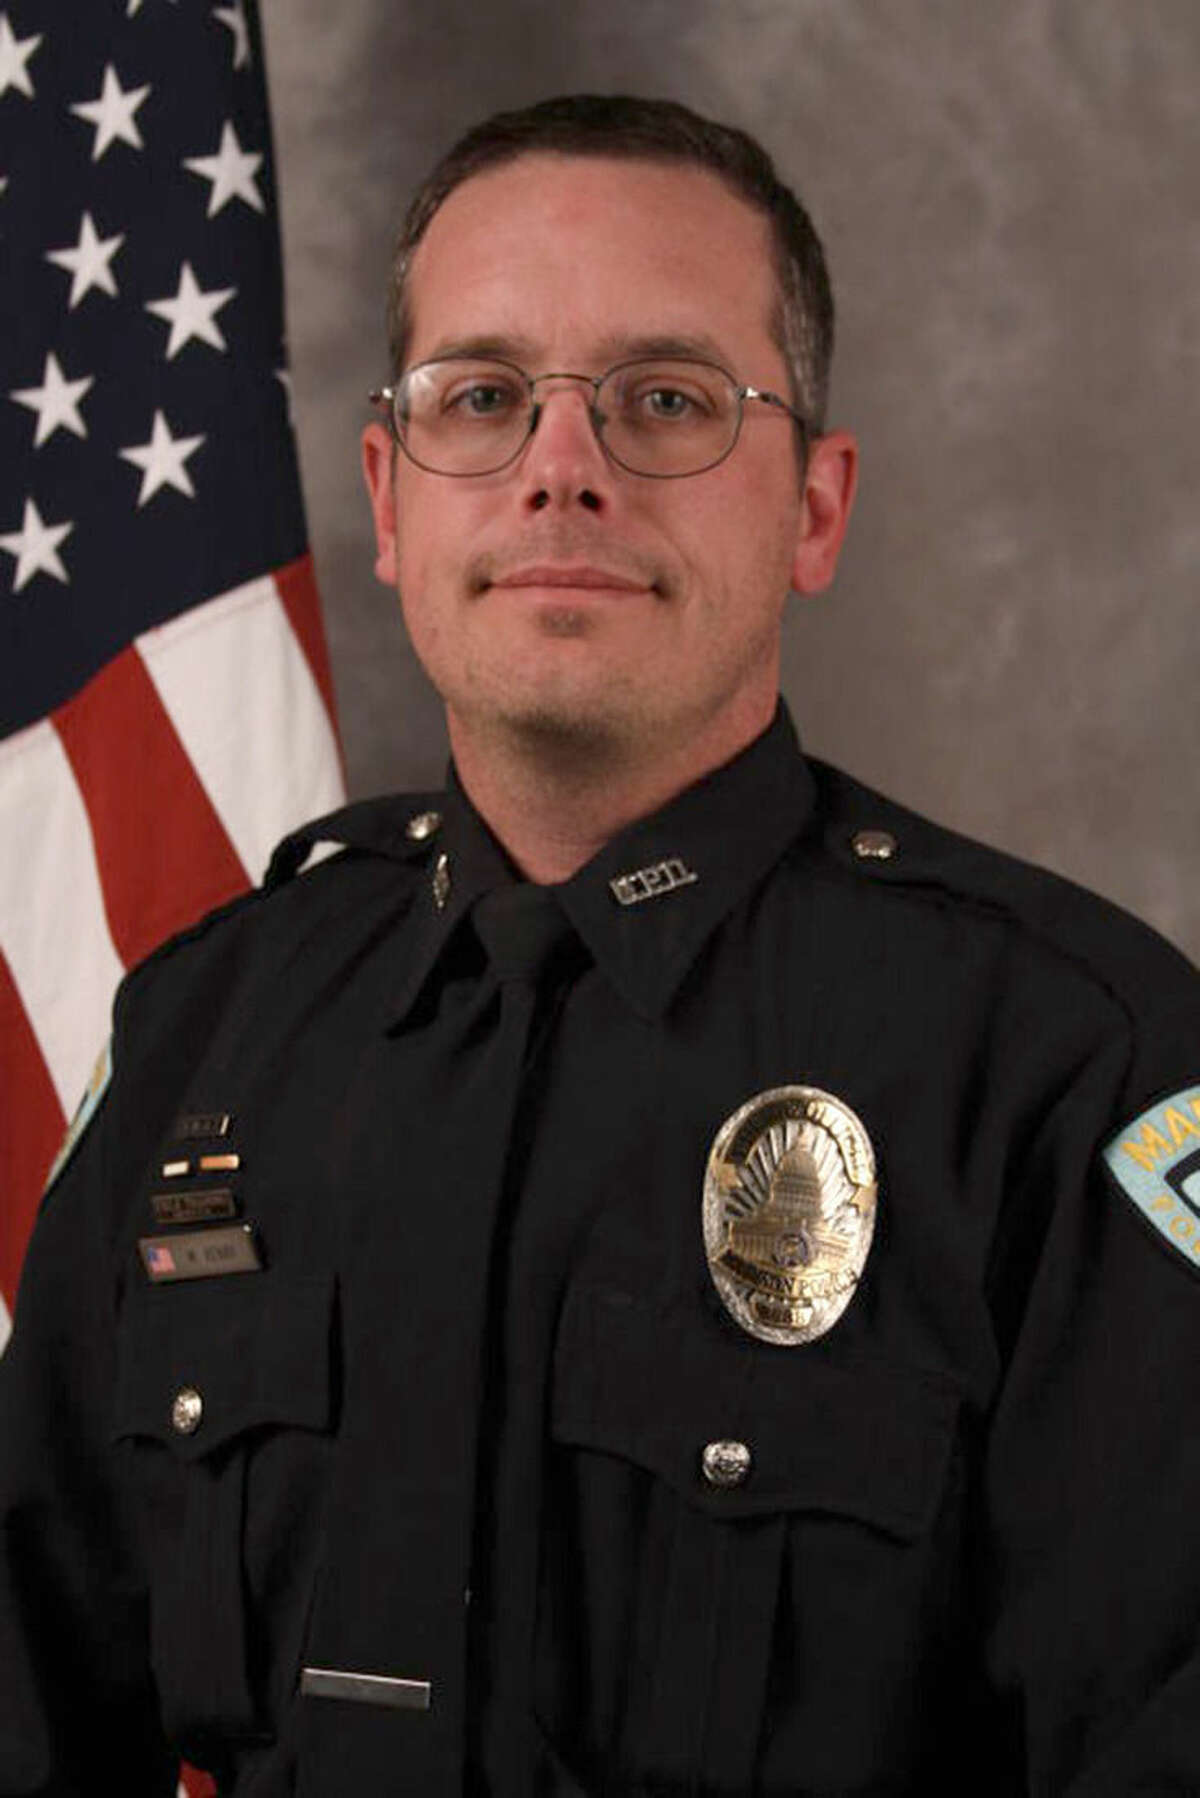 FILE - This undated file photo provided by the Madison, Wis., Police Department shows Officer Matt Kenny. Kenny fatally shot an unarmed 19-year-old man in Madison on March 6, 2015. A prosecutor is set to announce Tuesday, May 12, 2015, whether the white police officer will face charges for killing the young unarmed biracial man in Madison. (AP Photo/Madison Police Department)